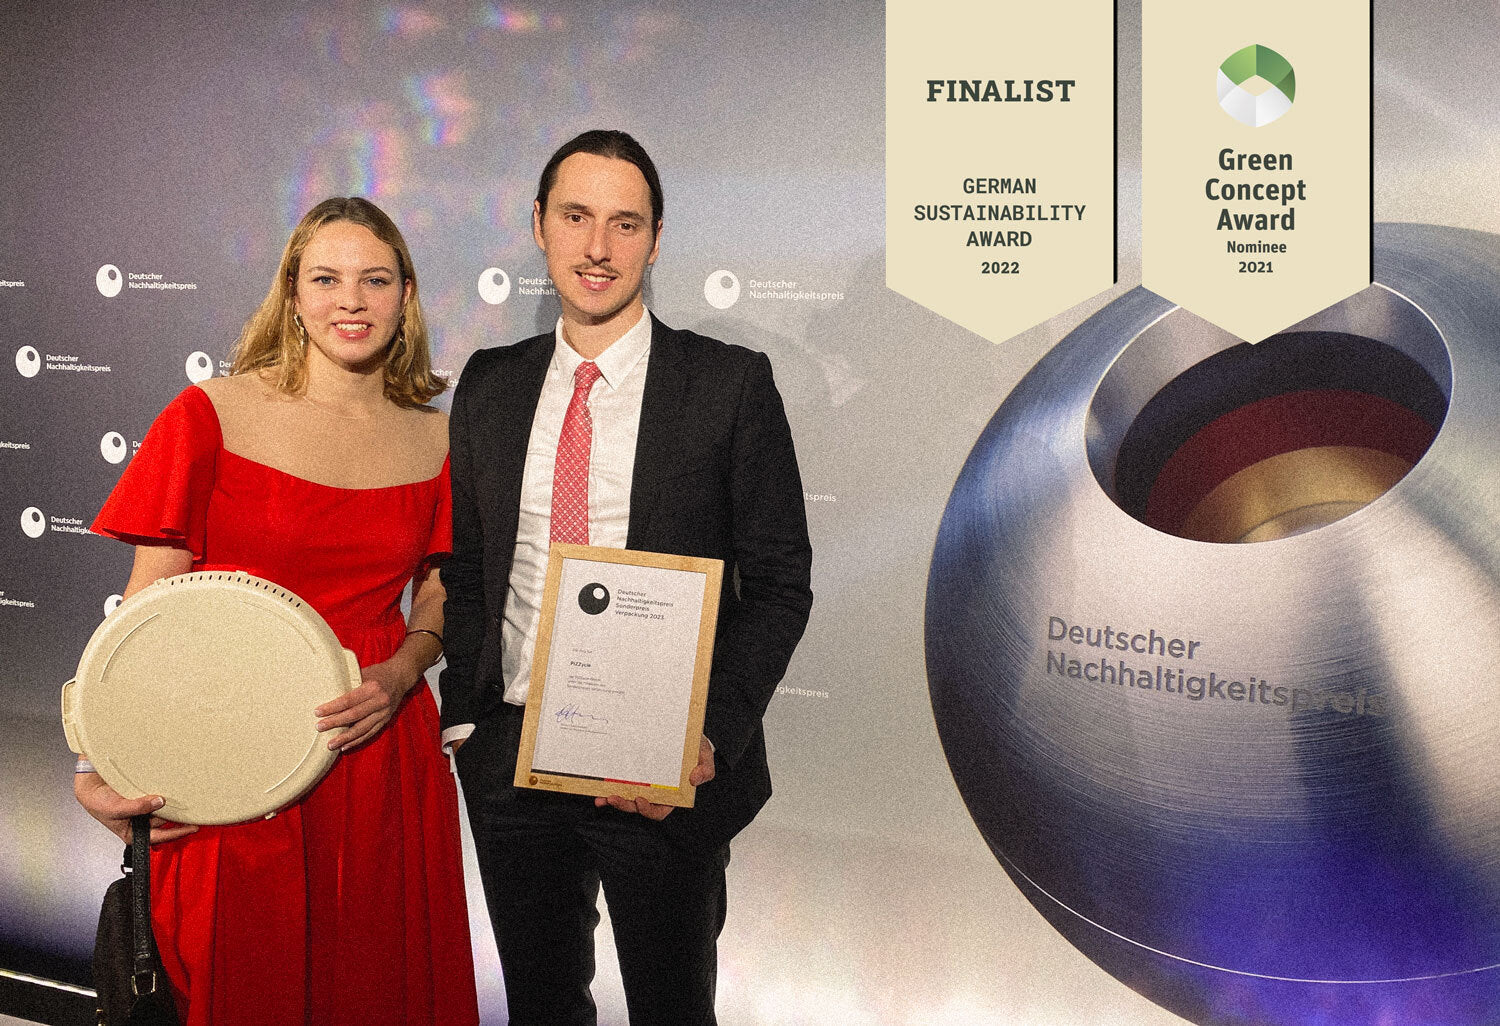 PIZZycle reusable pizza container sustainable innovative design German sustainability award green concept award